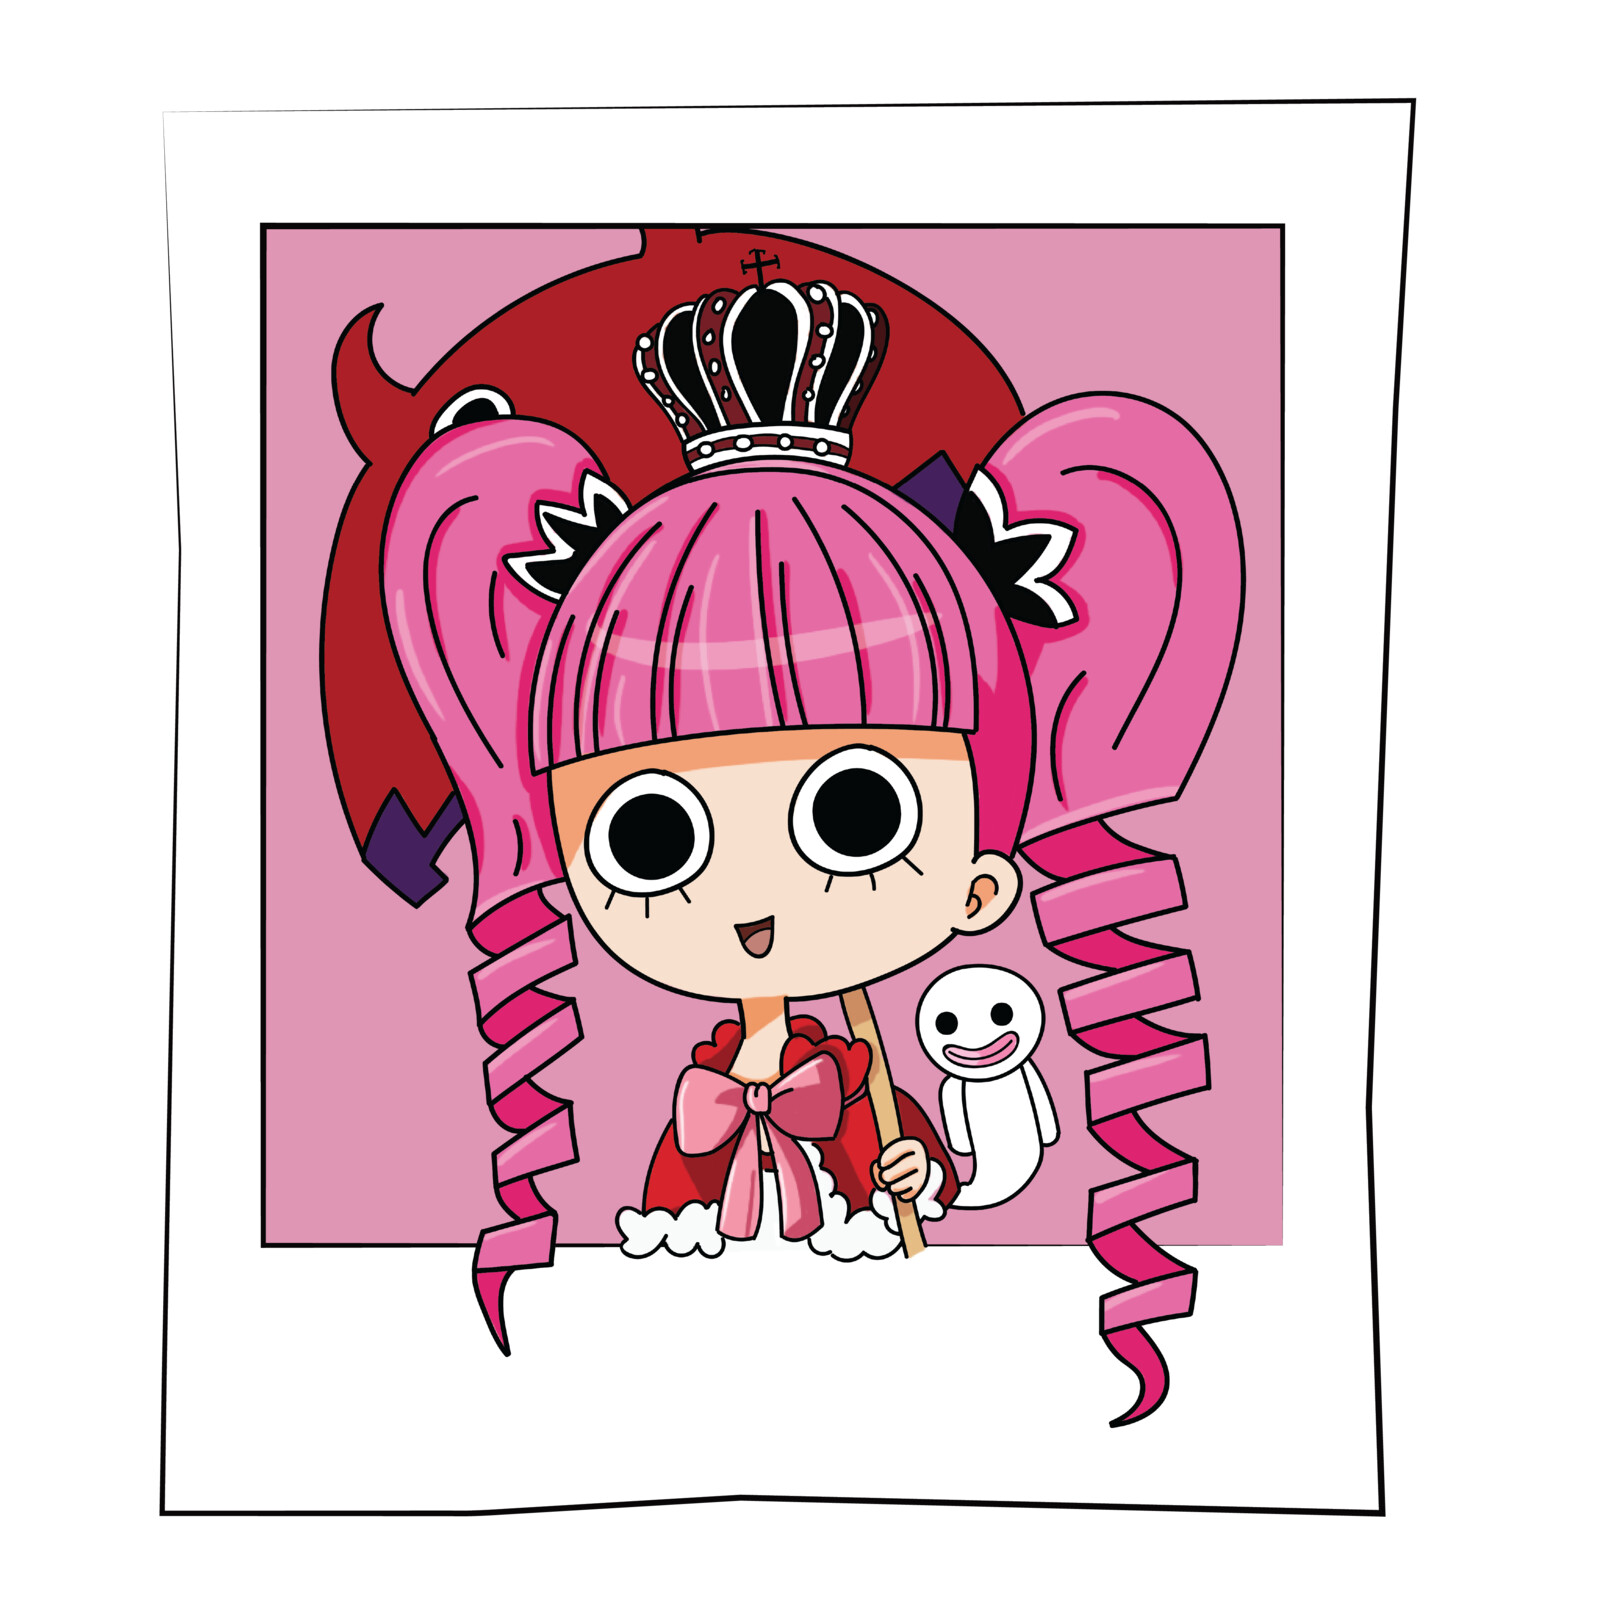 Perona from One Piece